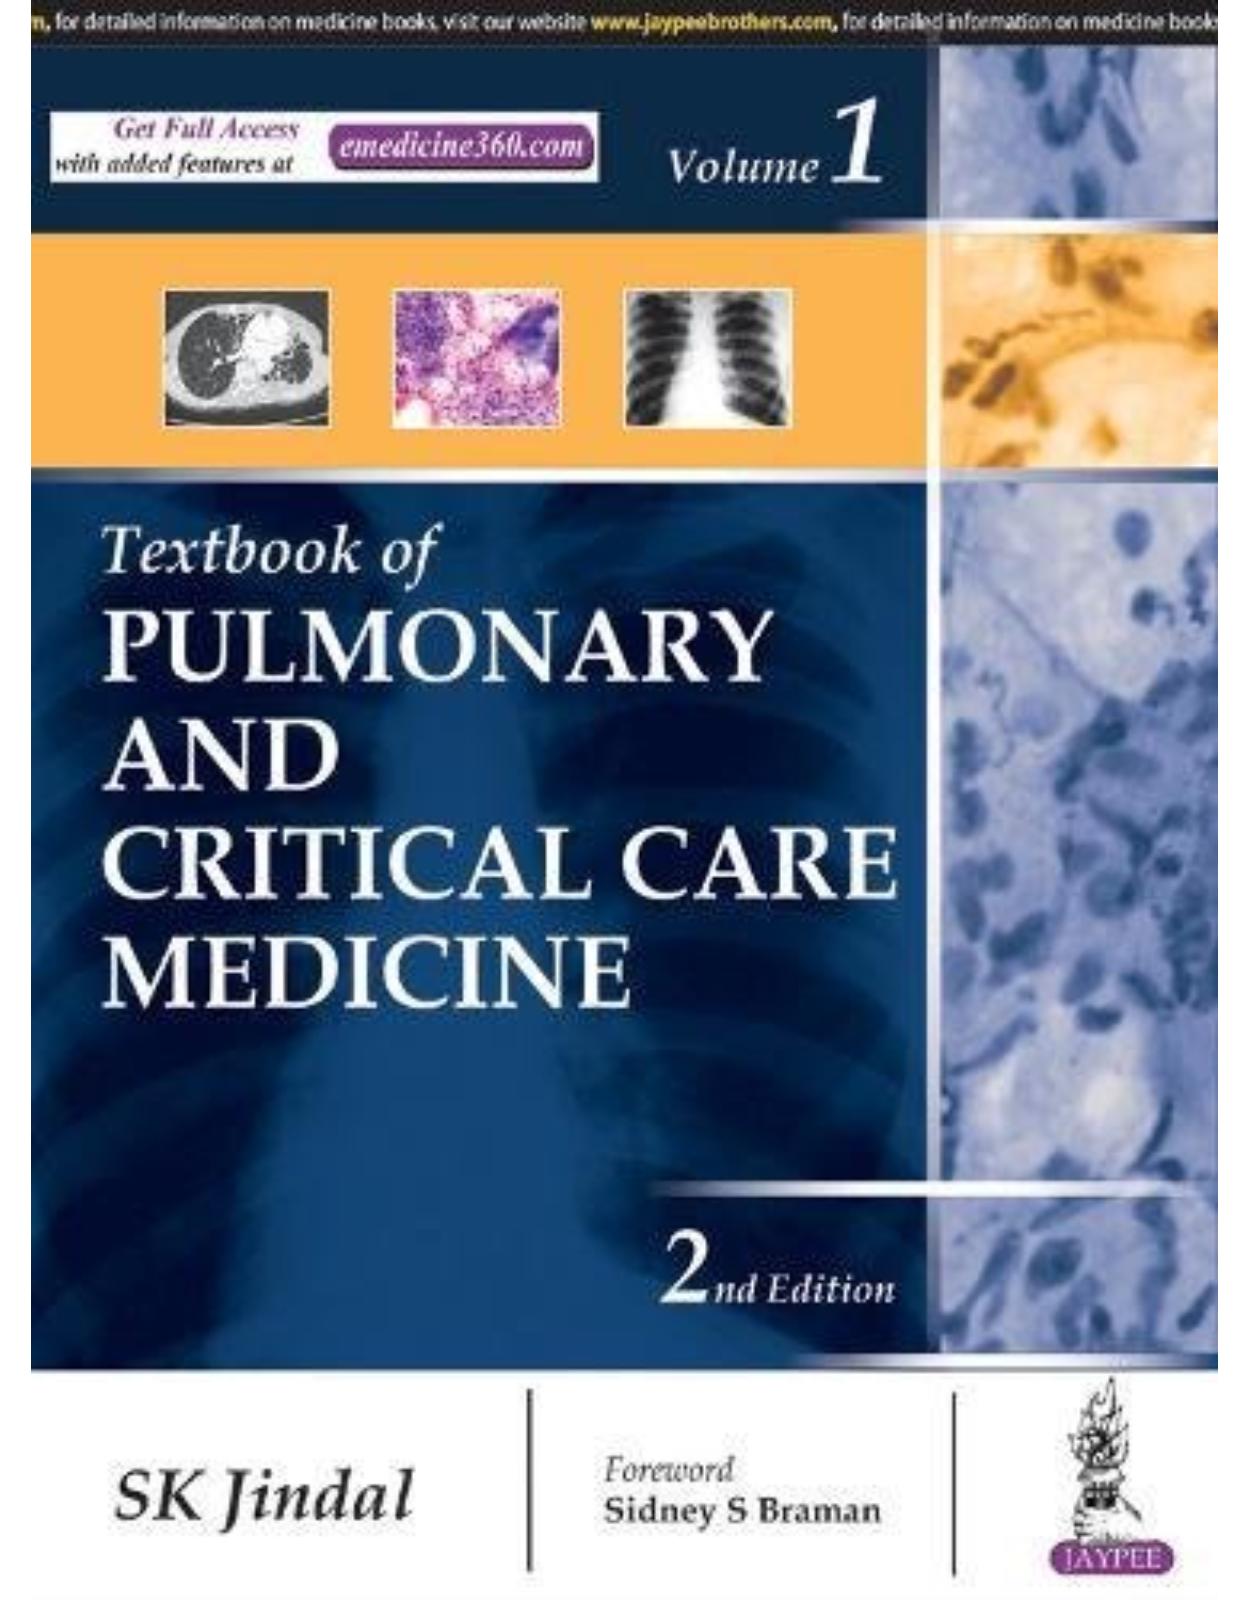 Textbook of Pulmonary and Critical Care Medicine: Two Volume Set